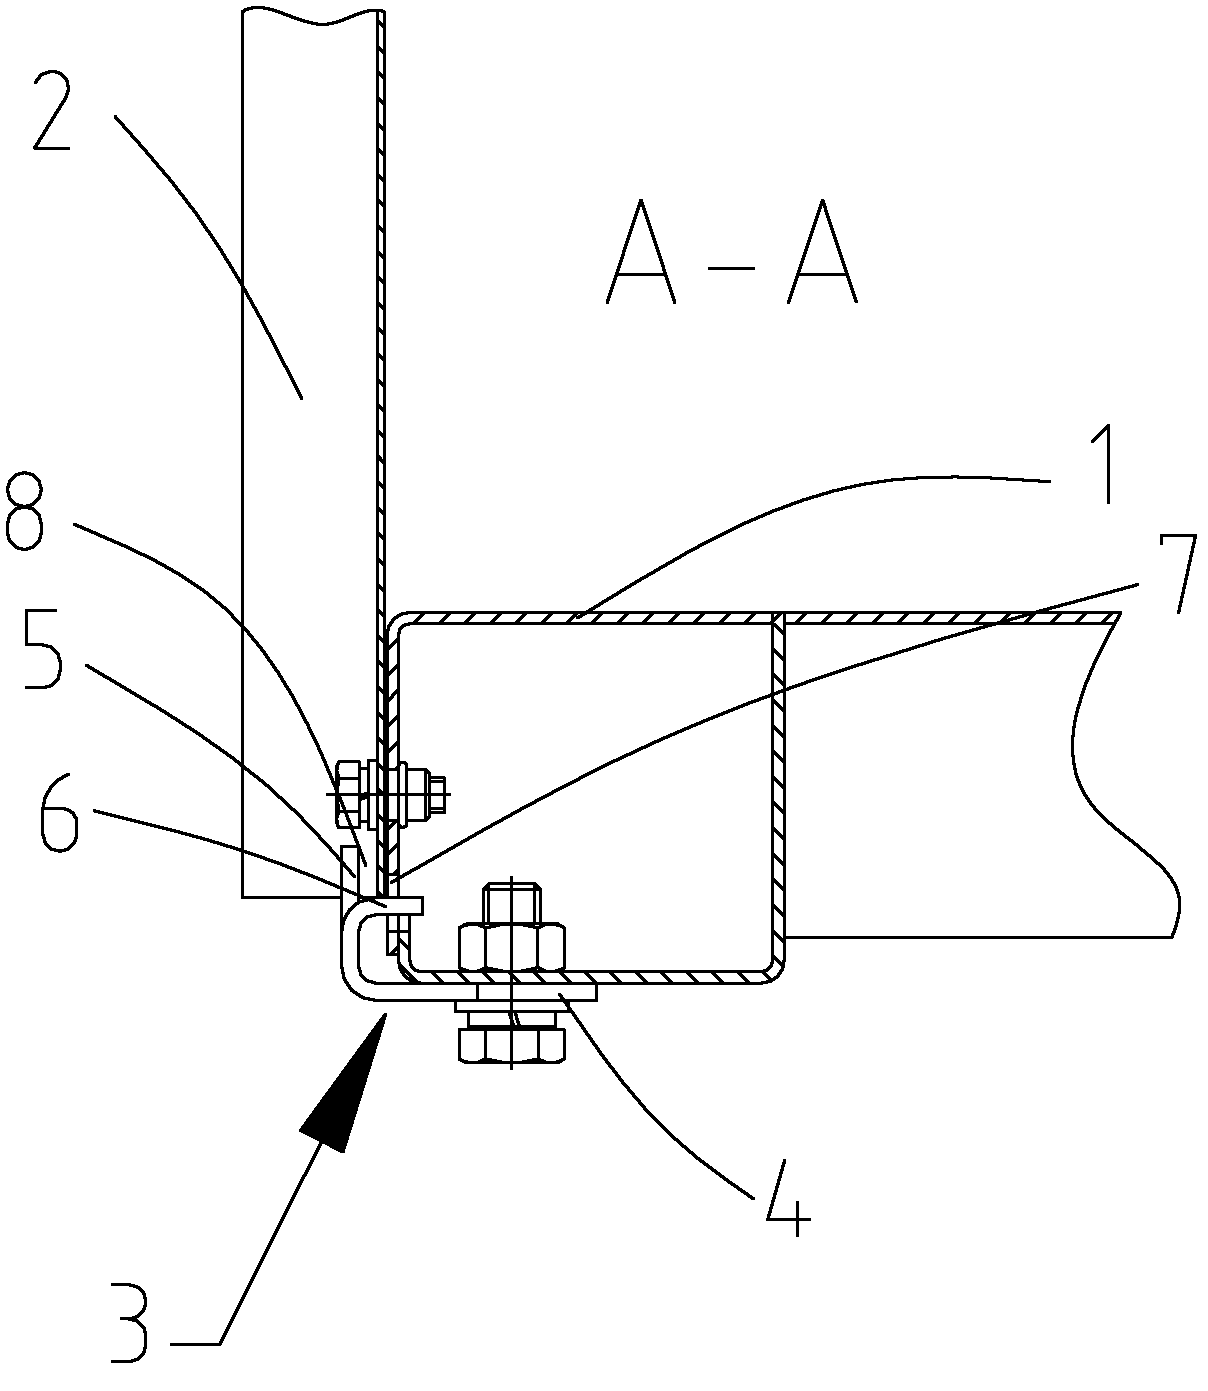 Auxiliary connecting structure for lift car wall and lift car bottom of elevator